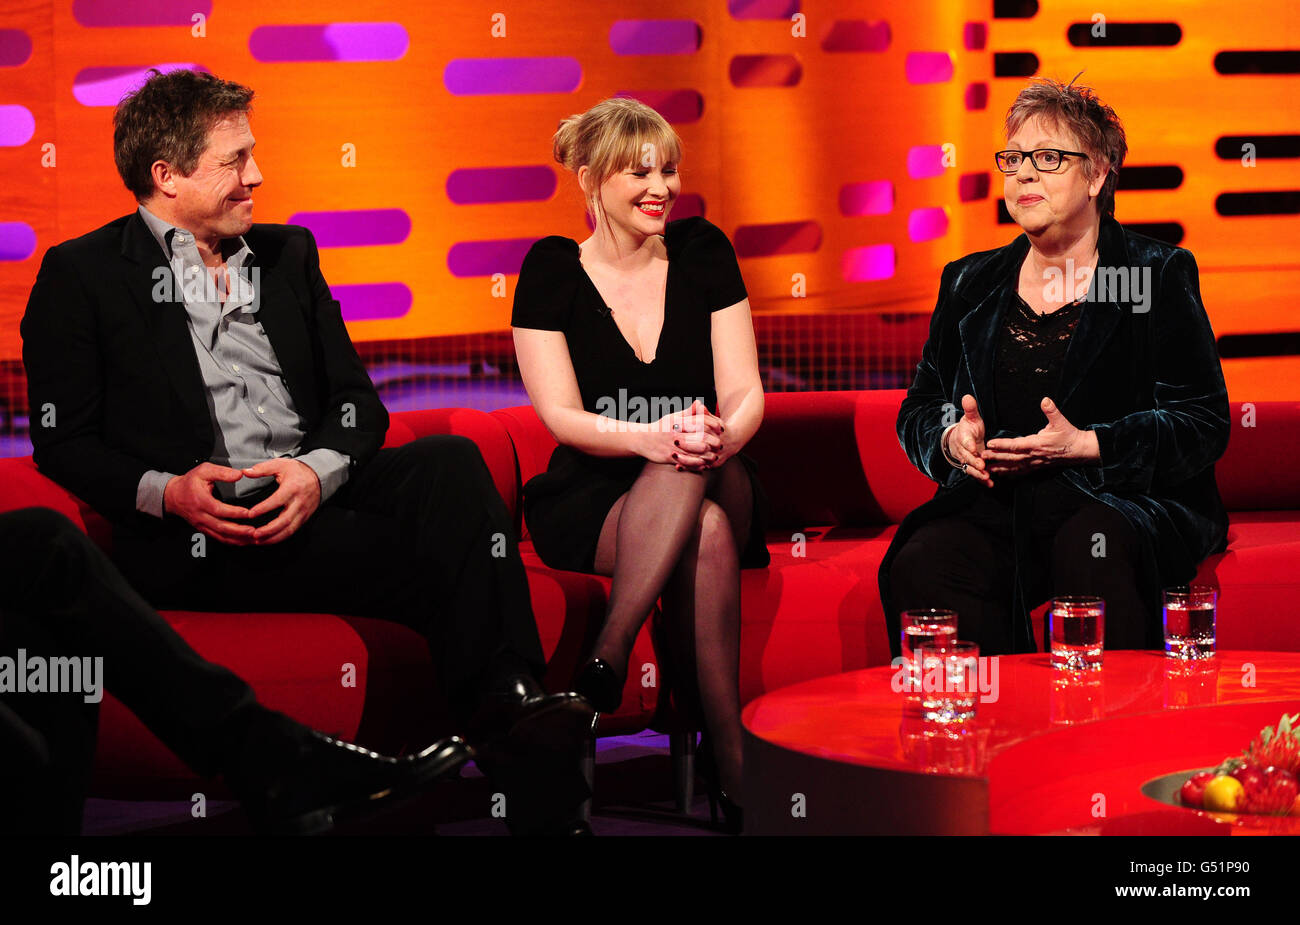 (Left - right) Hugh Grant, Joanna Page and Jo Brand during the filming of the Graham Norton Show at The London Studios, south London, to be aired on BBC One on Friday evening. PRESS ASSOCIATION Photo. Picture date: Thursday March 15, 2012. Photo credit should read: Ian West/PA Wire Stock Photo